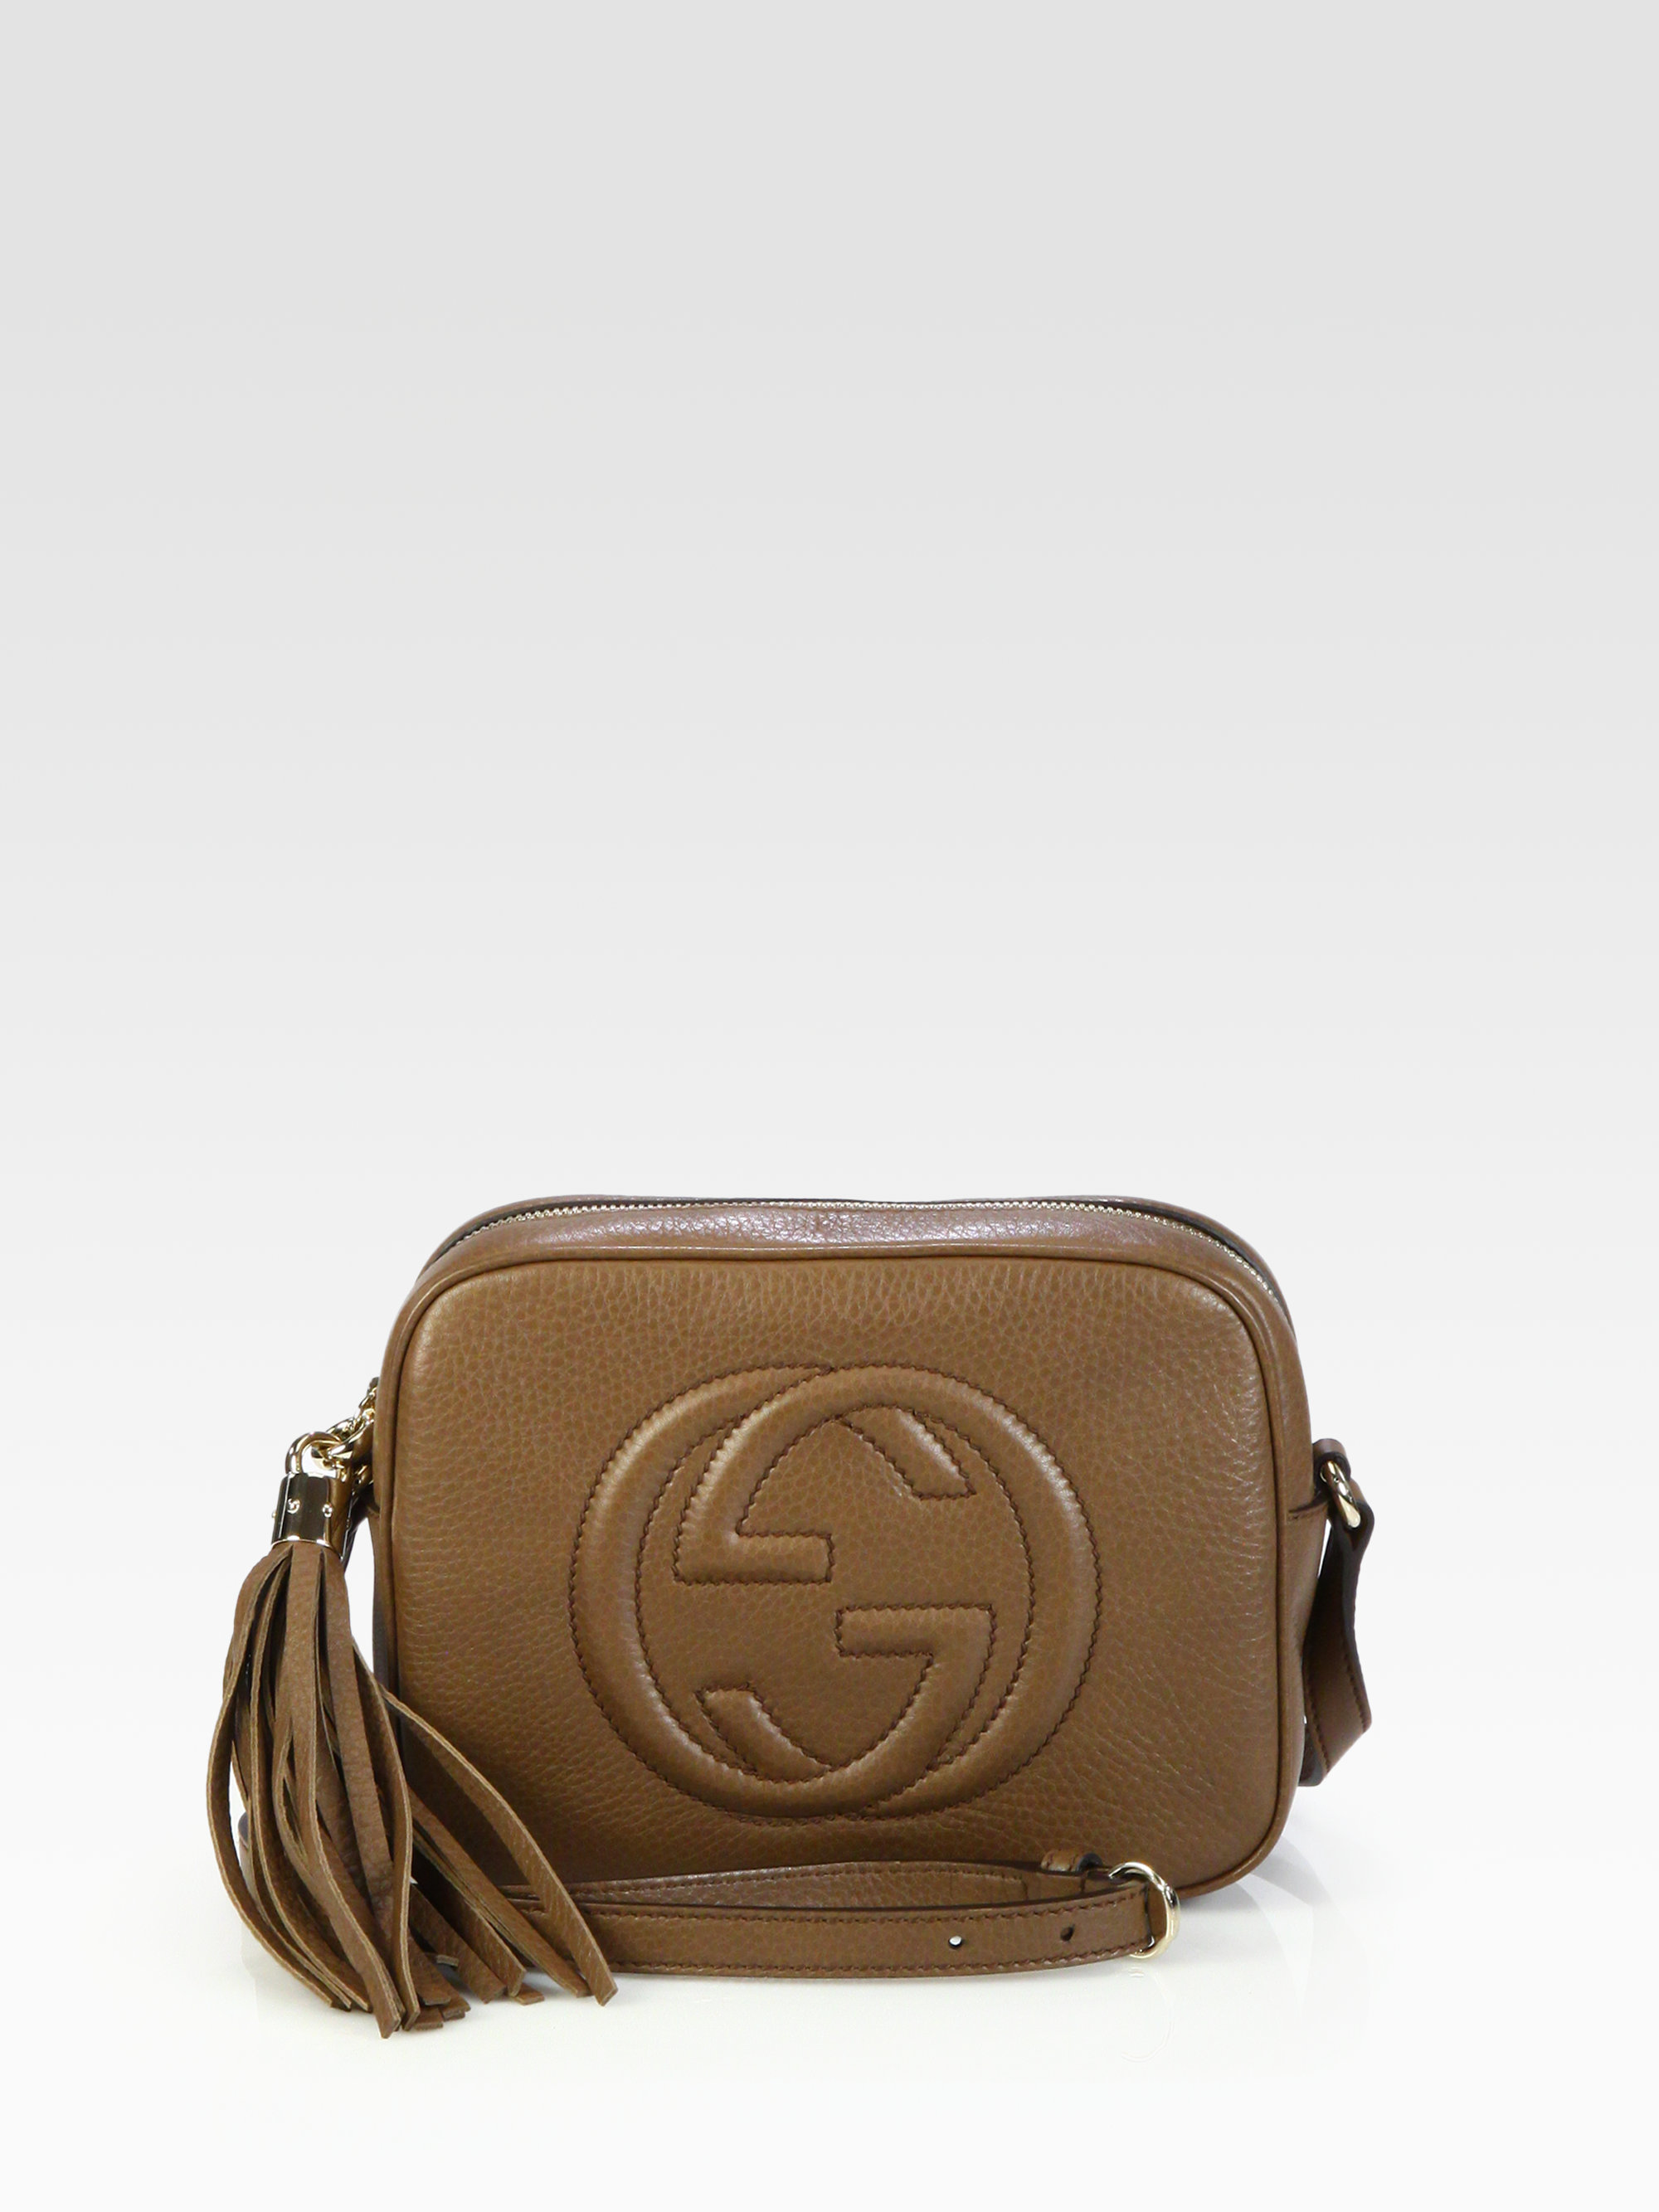 Gucci Soho Leather Bag in Brown Lyst